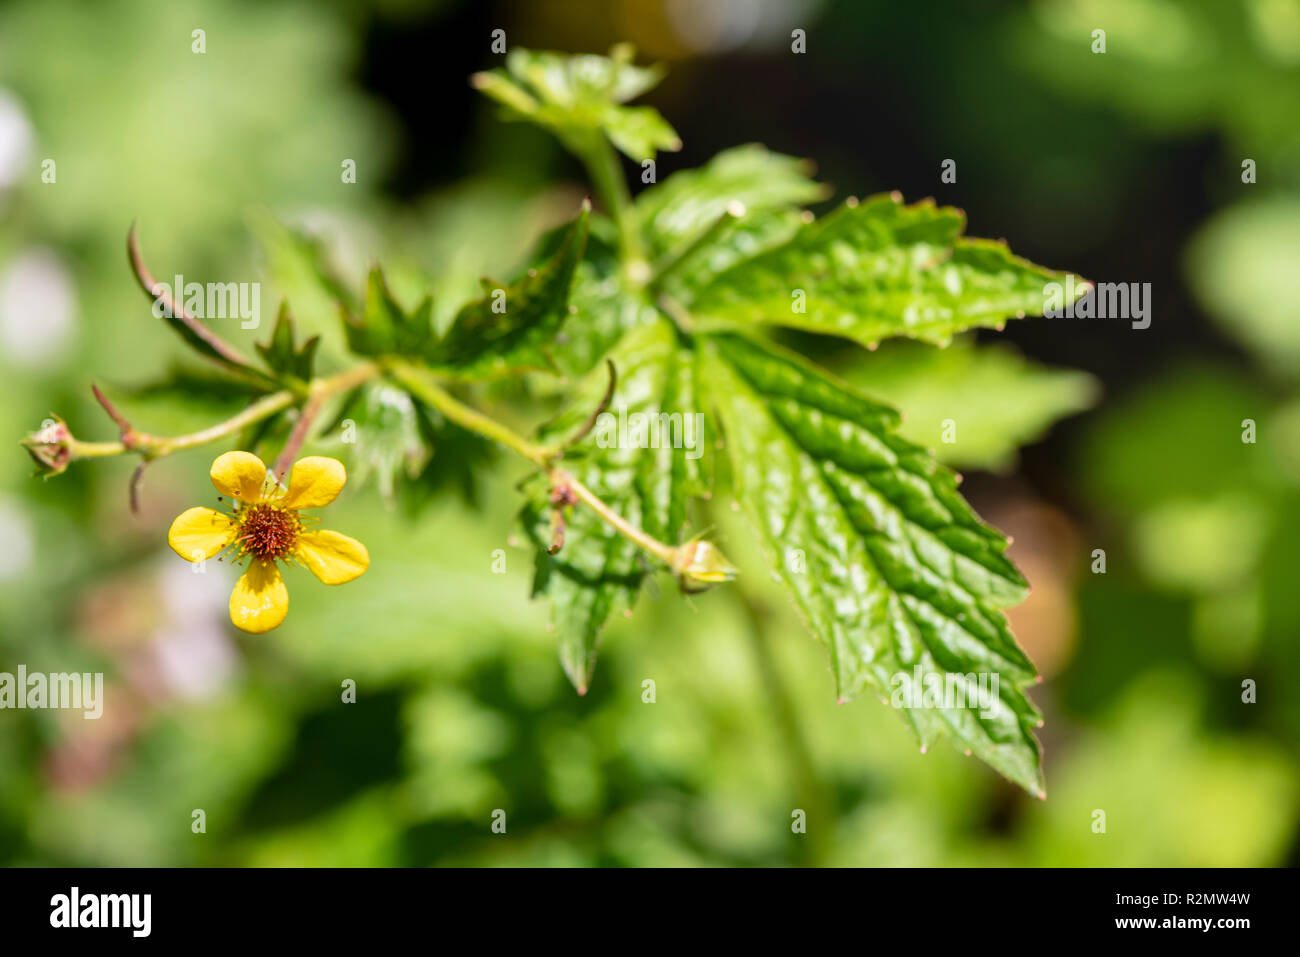 Avens as a medicinal plant for natural medicine and herbal medicine Stock Photo